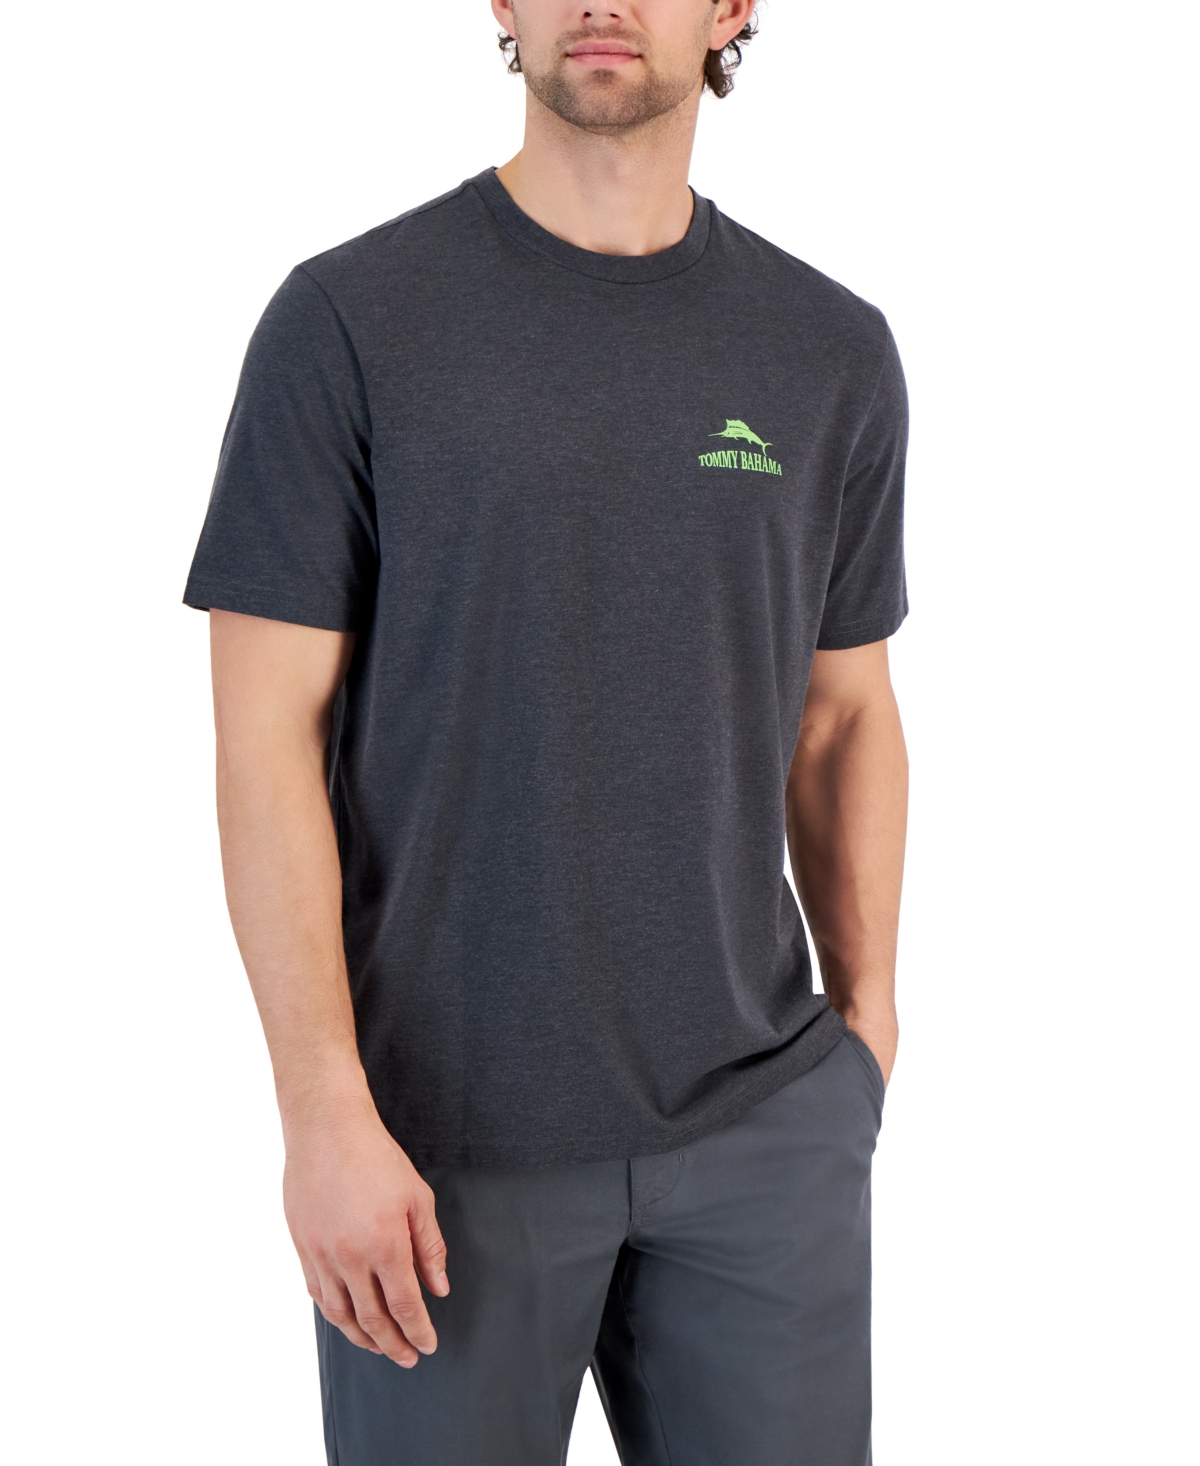 Men's Pick Up Lime Graphic T-Shirt - Coal Heather